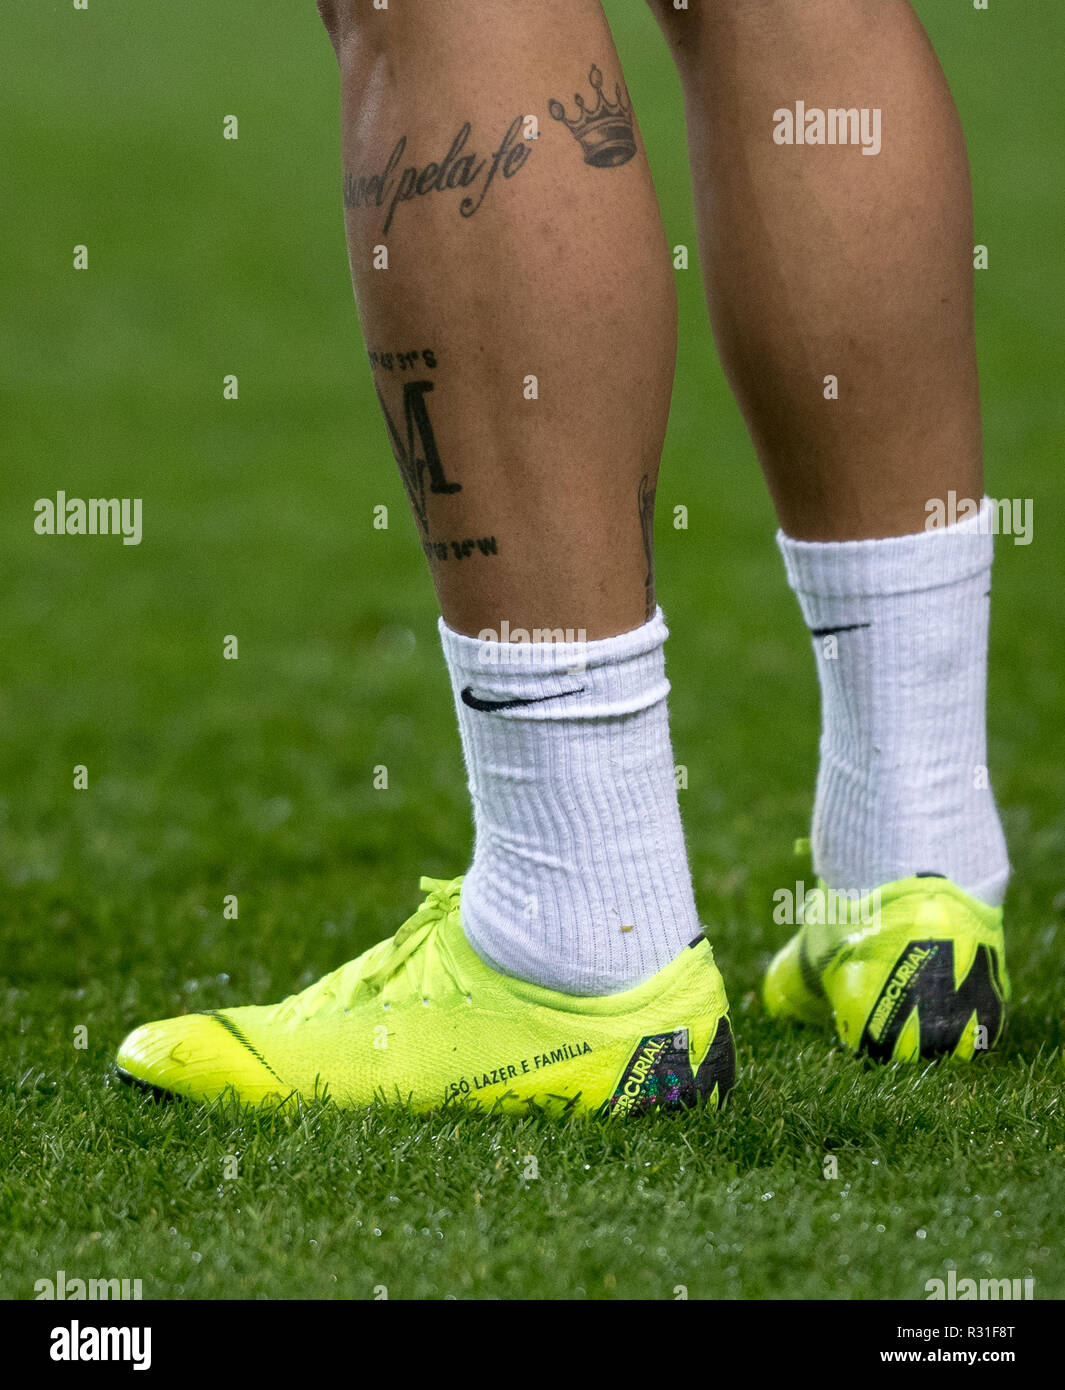 Milton Keynes, UK. 20th Nov 2018. The Nike Mercurial football boots of  Danilo (Manchester City) of Brazil displaying 'so lazer e familia' (just  leisure and family) during the International match between Brazil